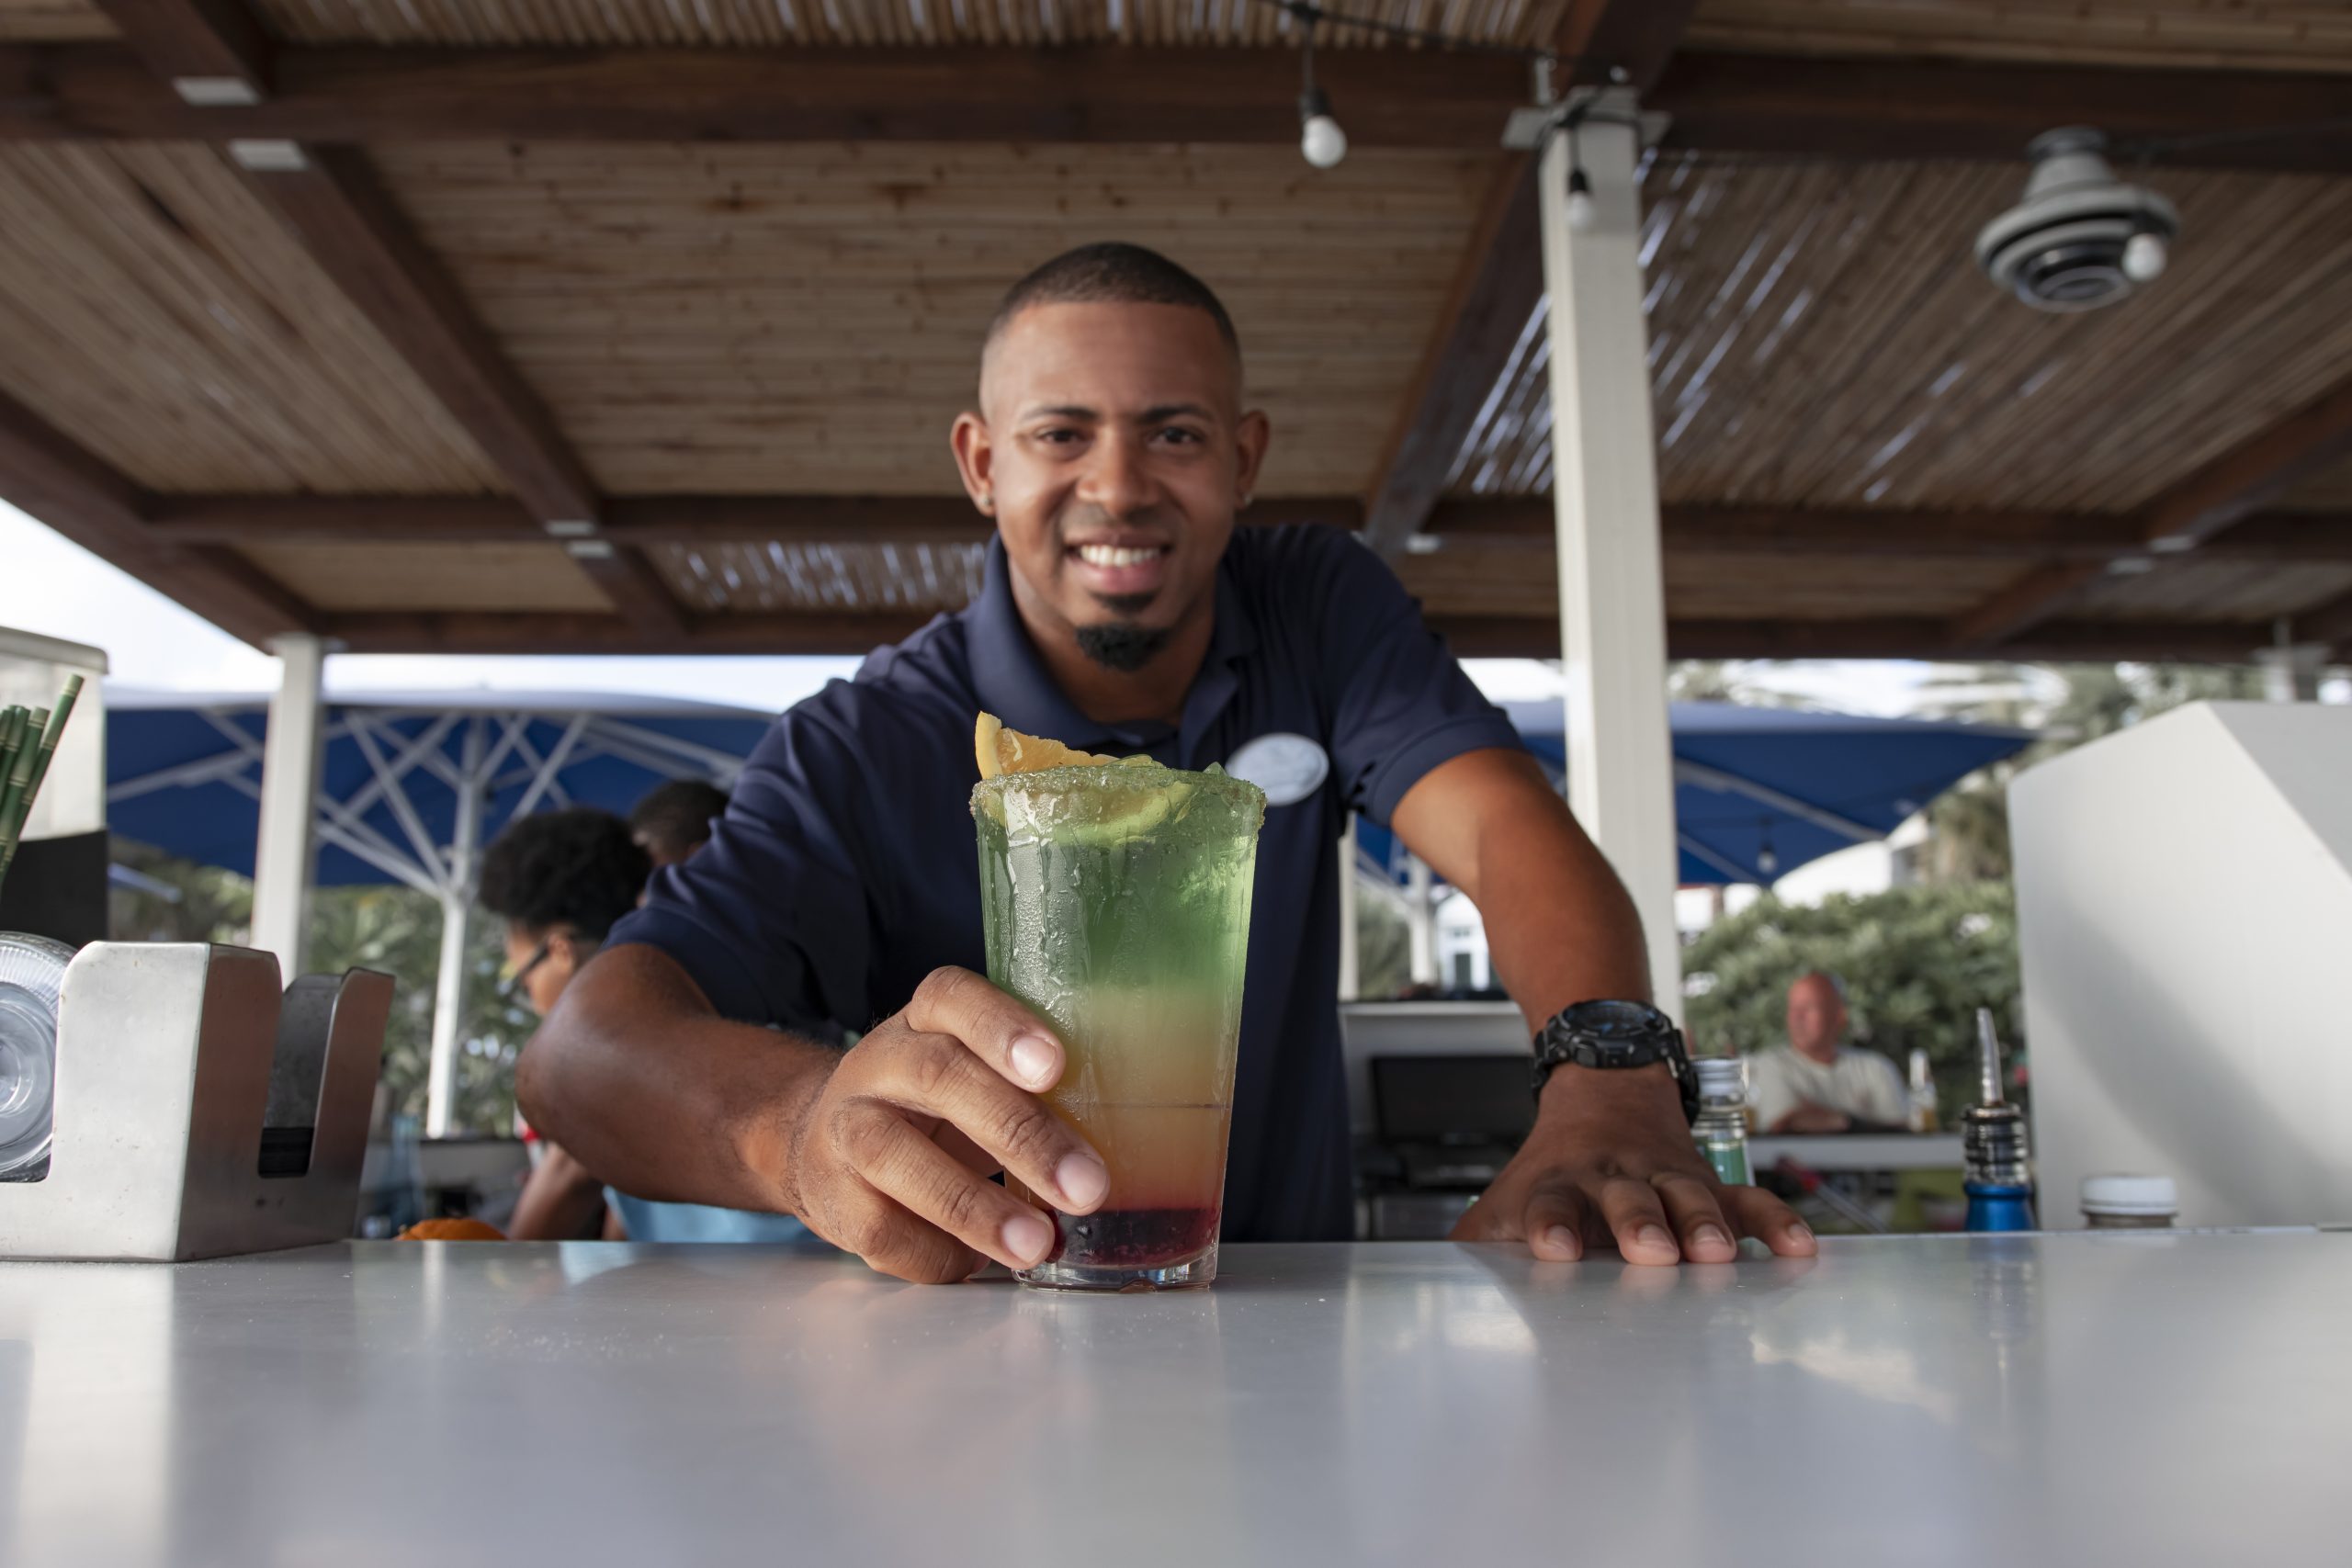 A young man standing behind a bar puts a drink on the counter